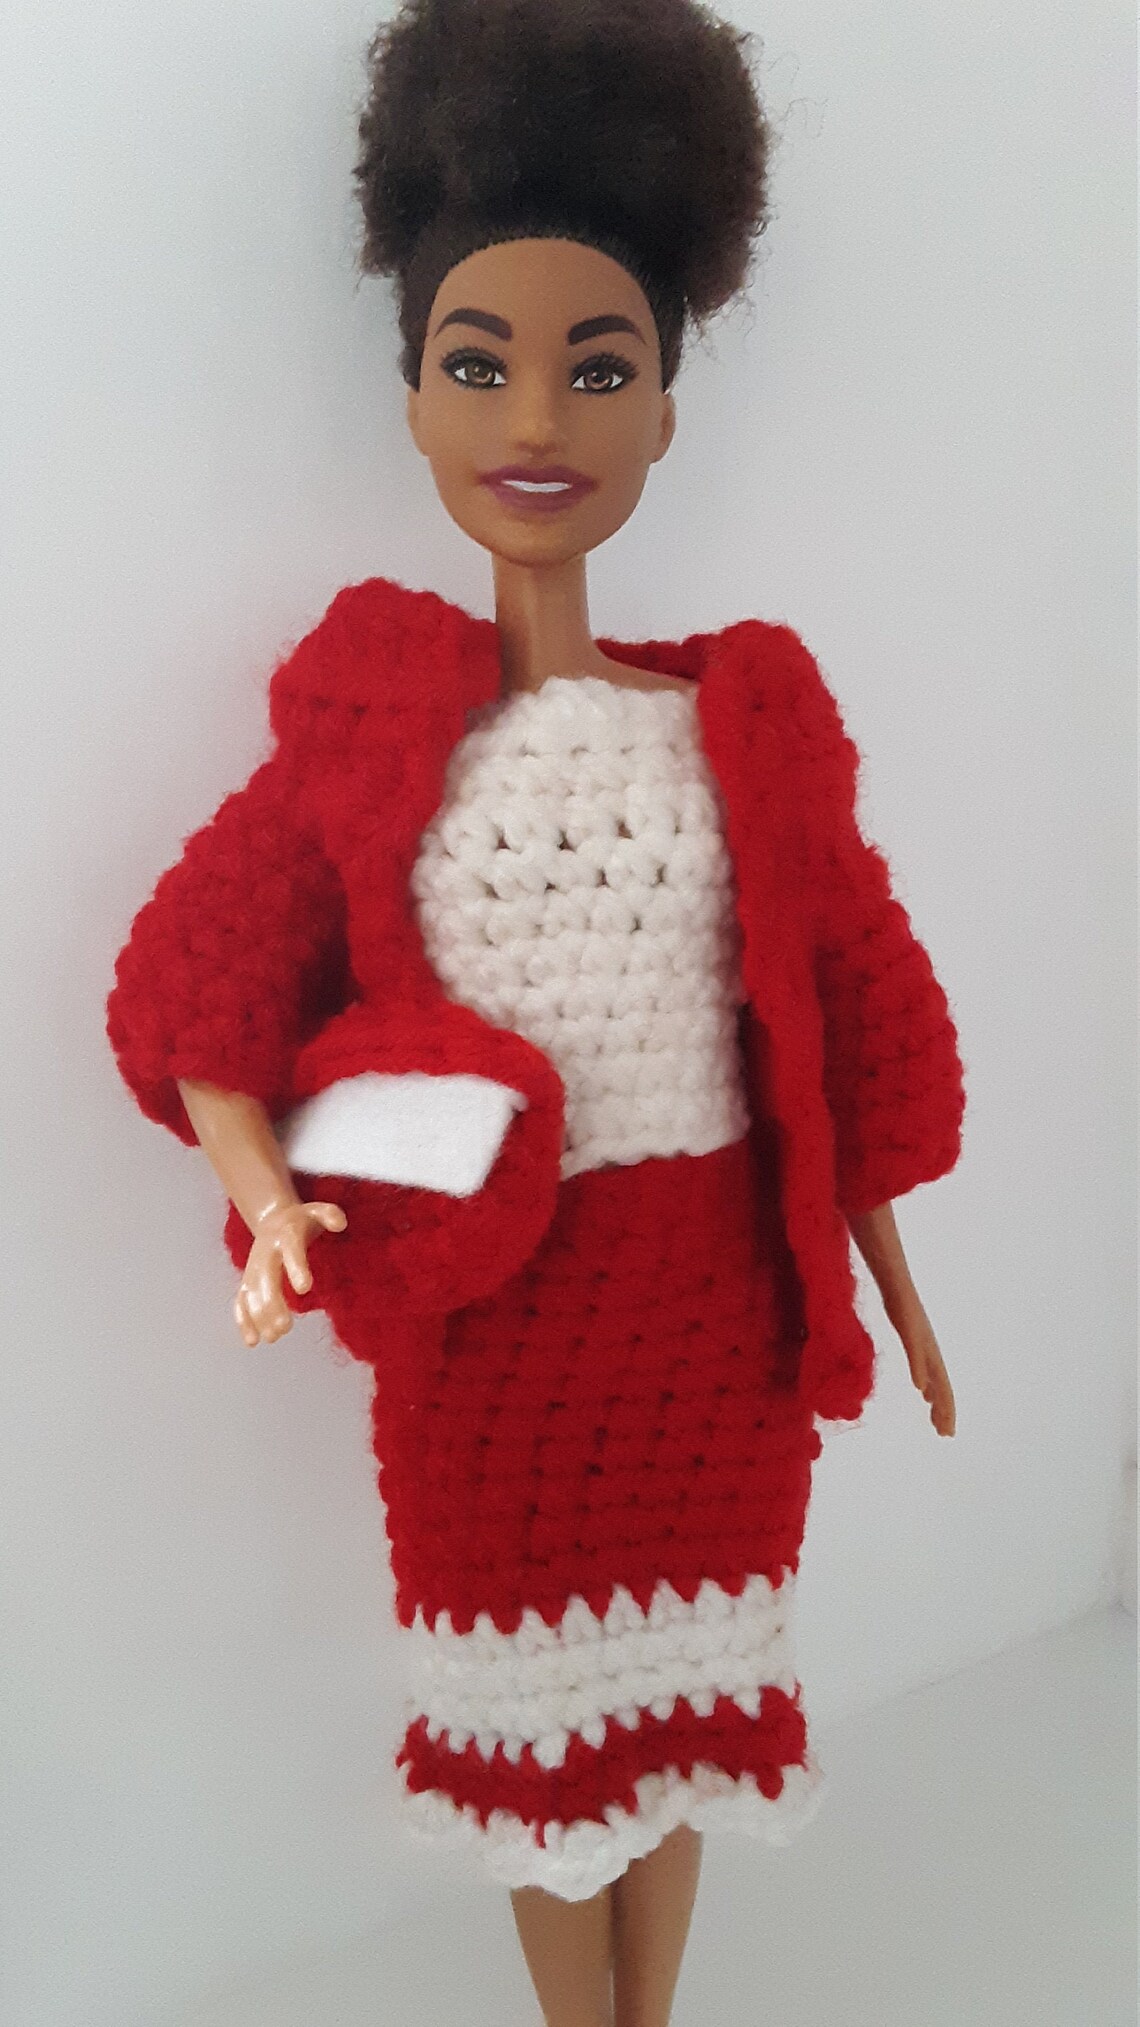 HBCU doll Winston Salem red and white 12 inch doll clothes | Etsy